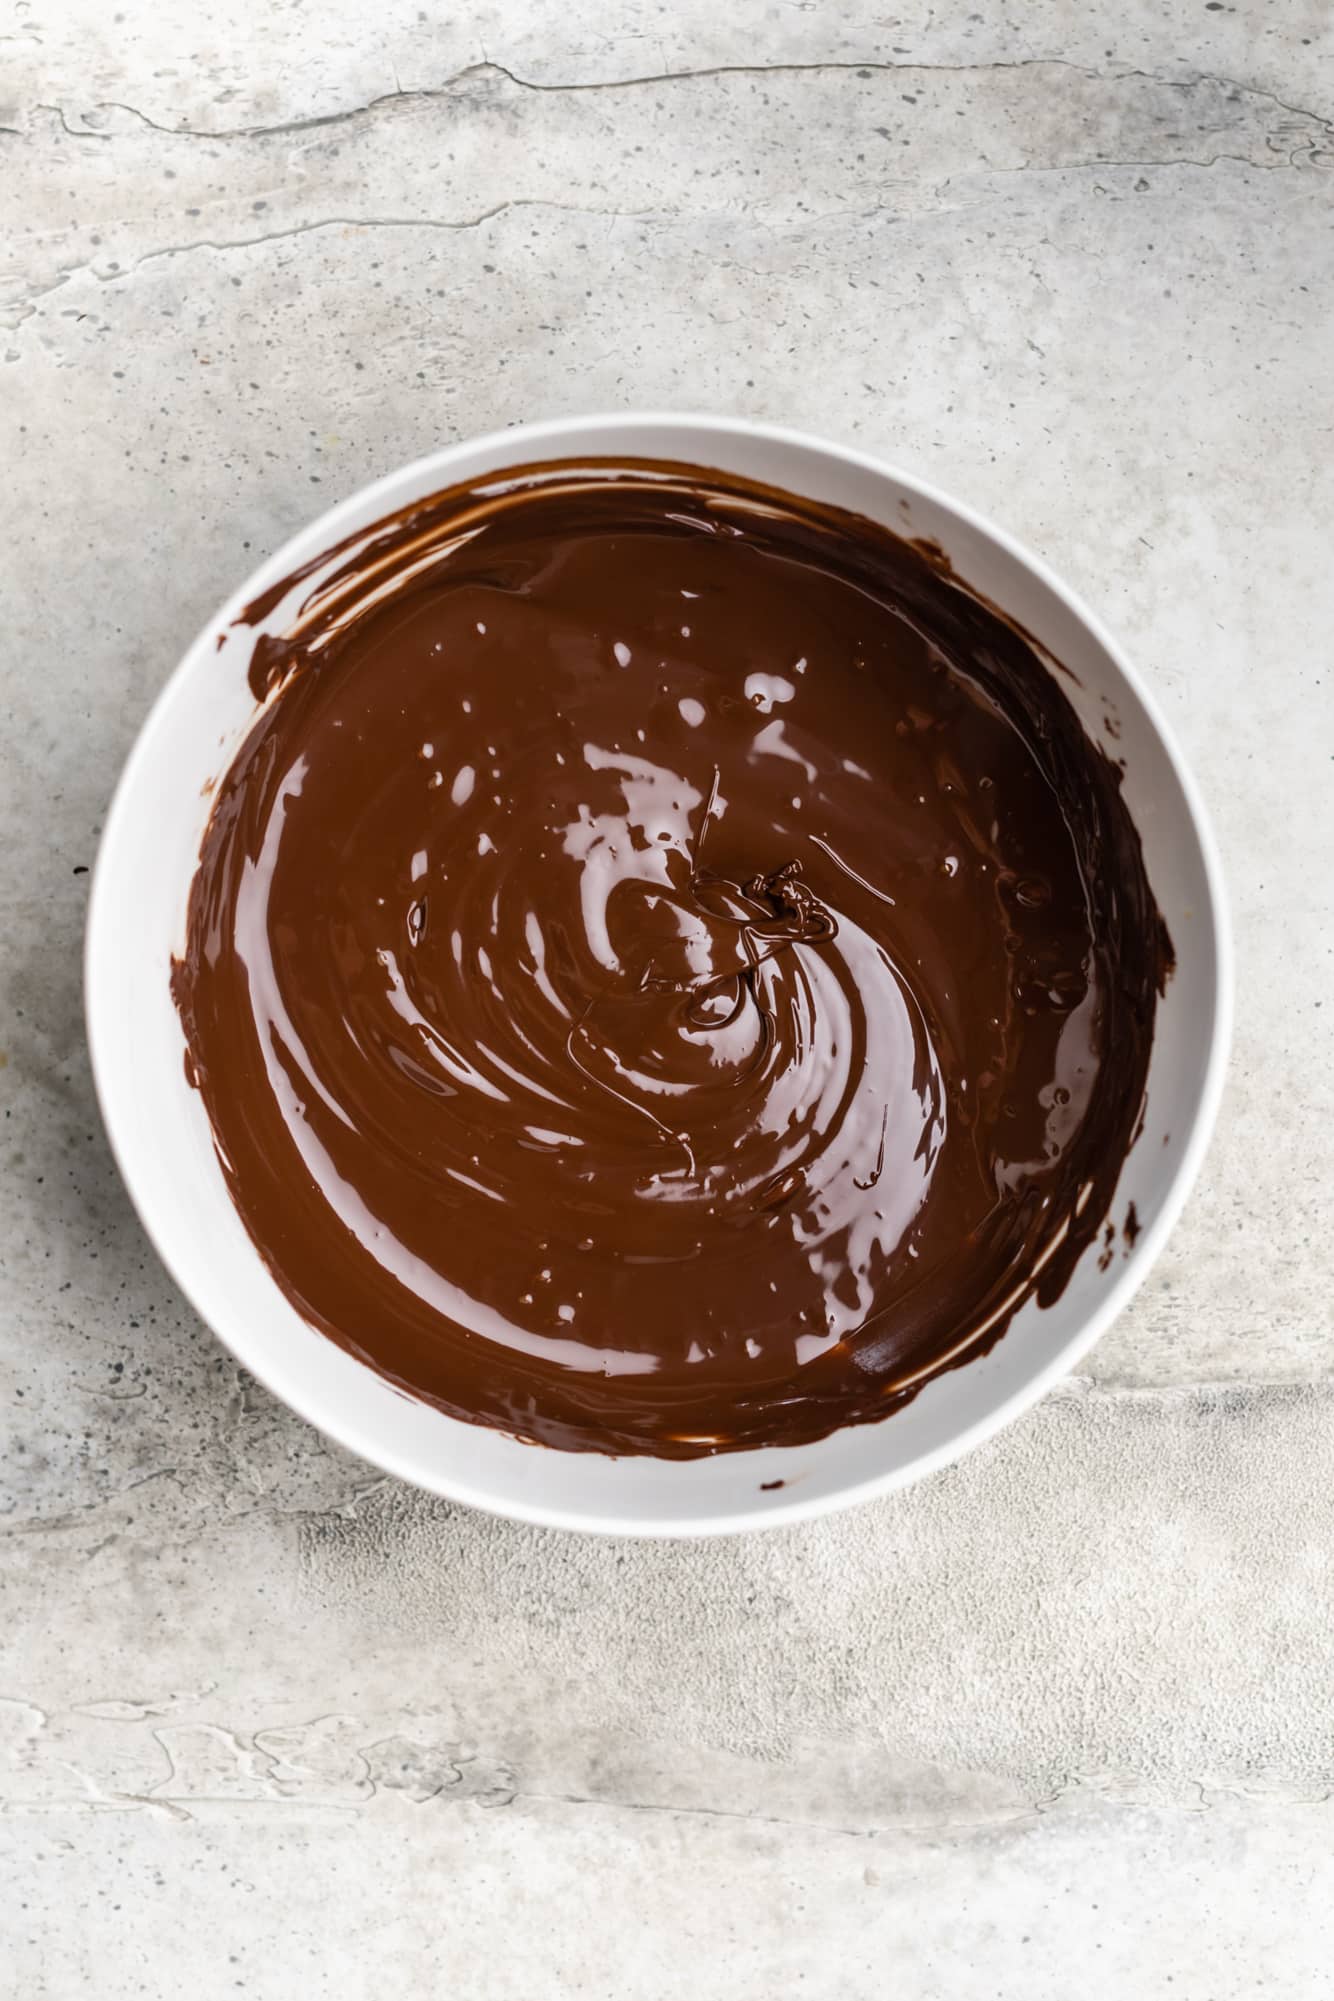 melted chocolate in a large white bowl.